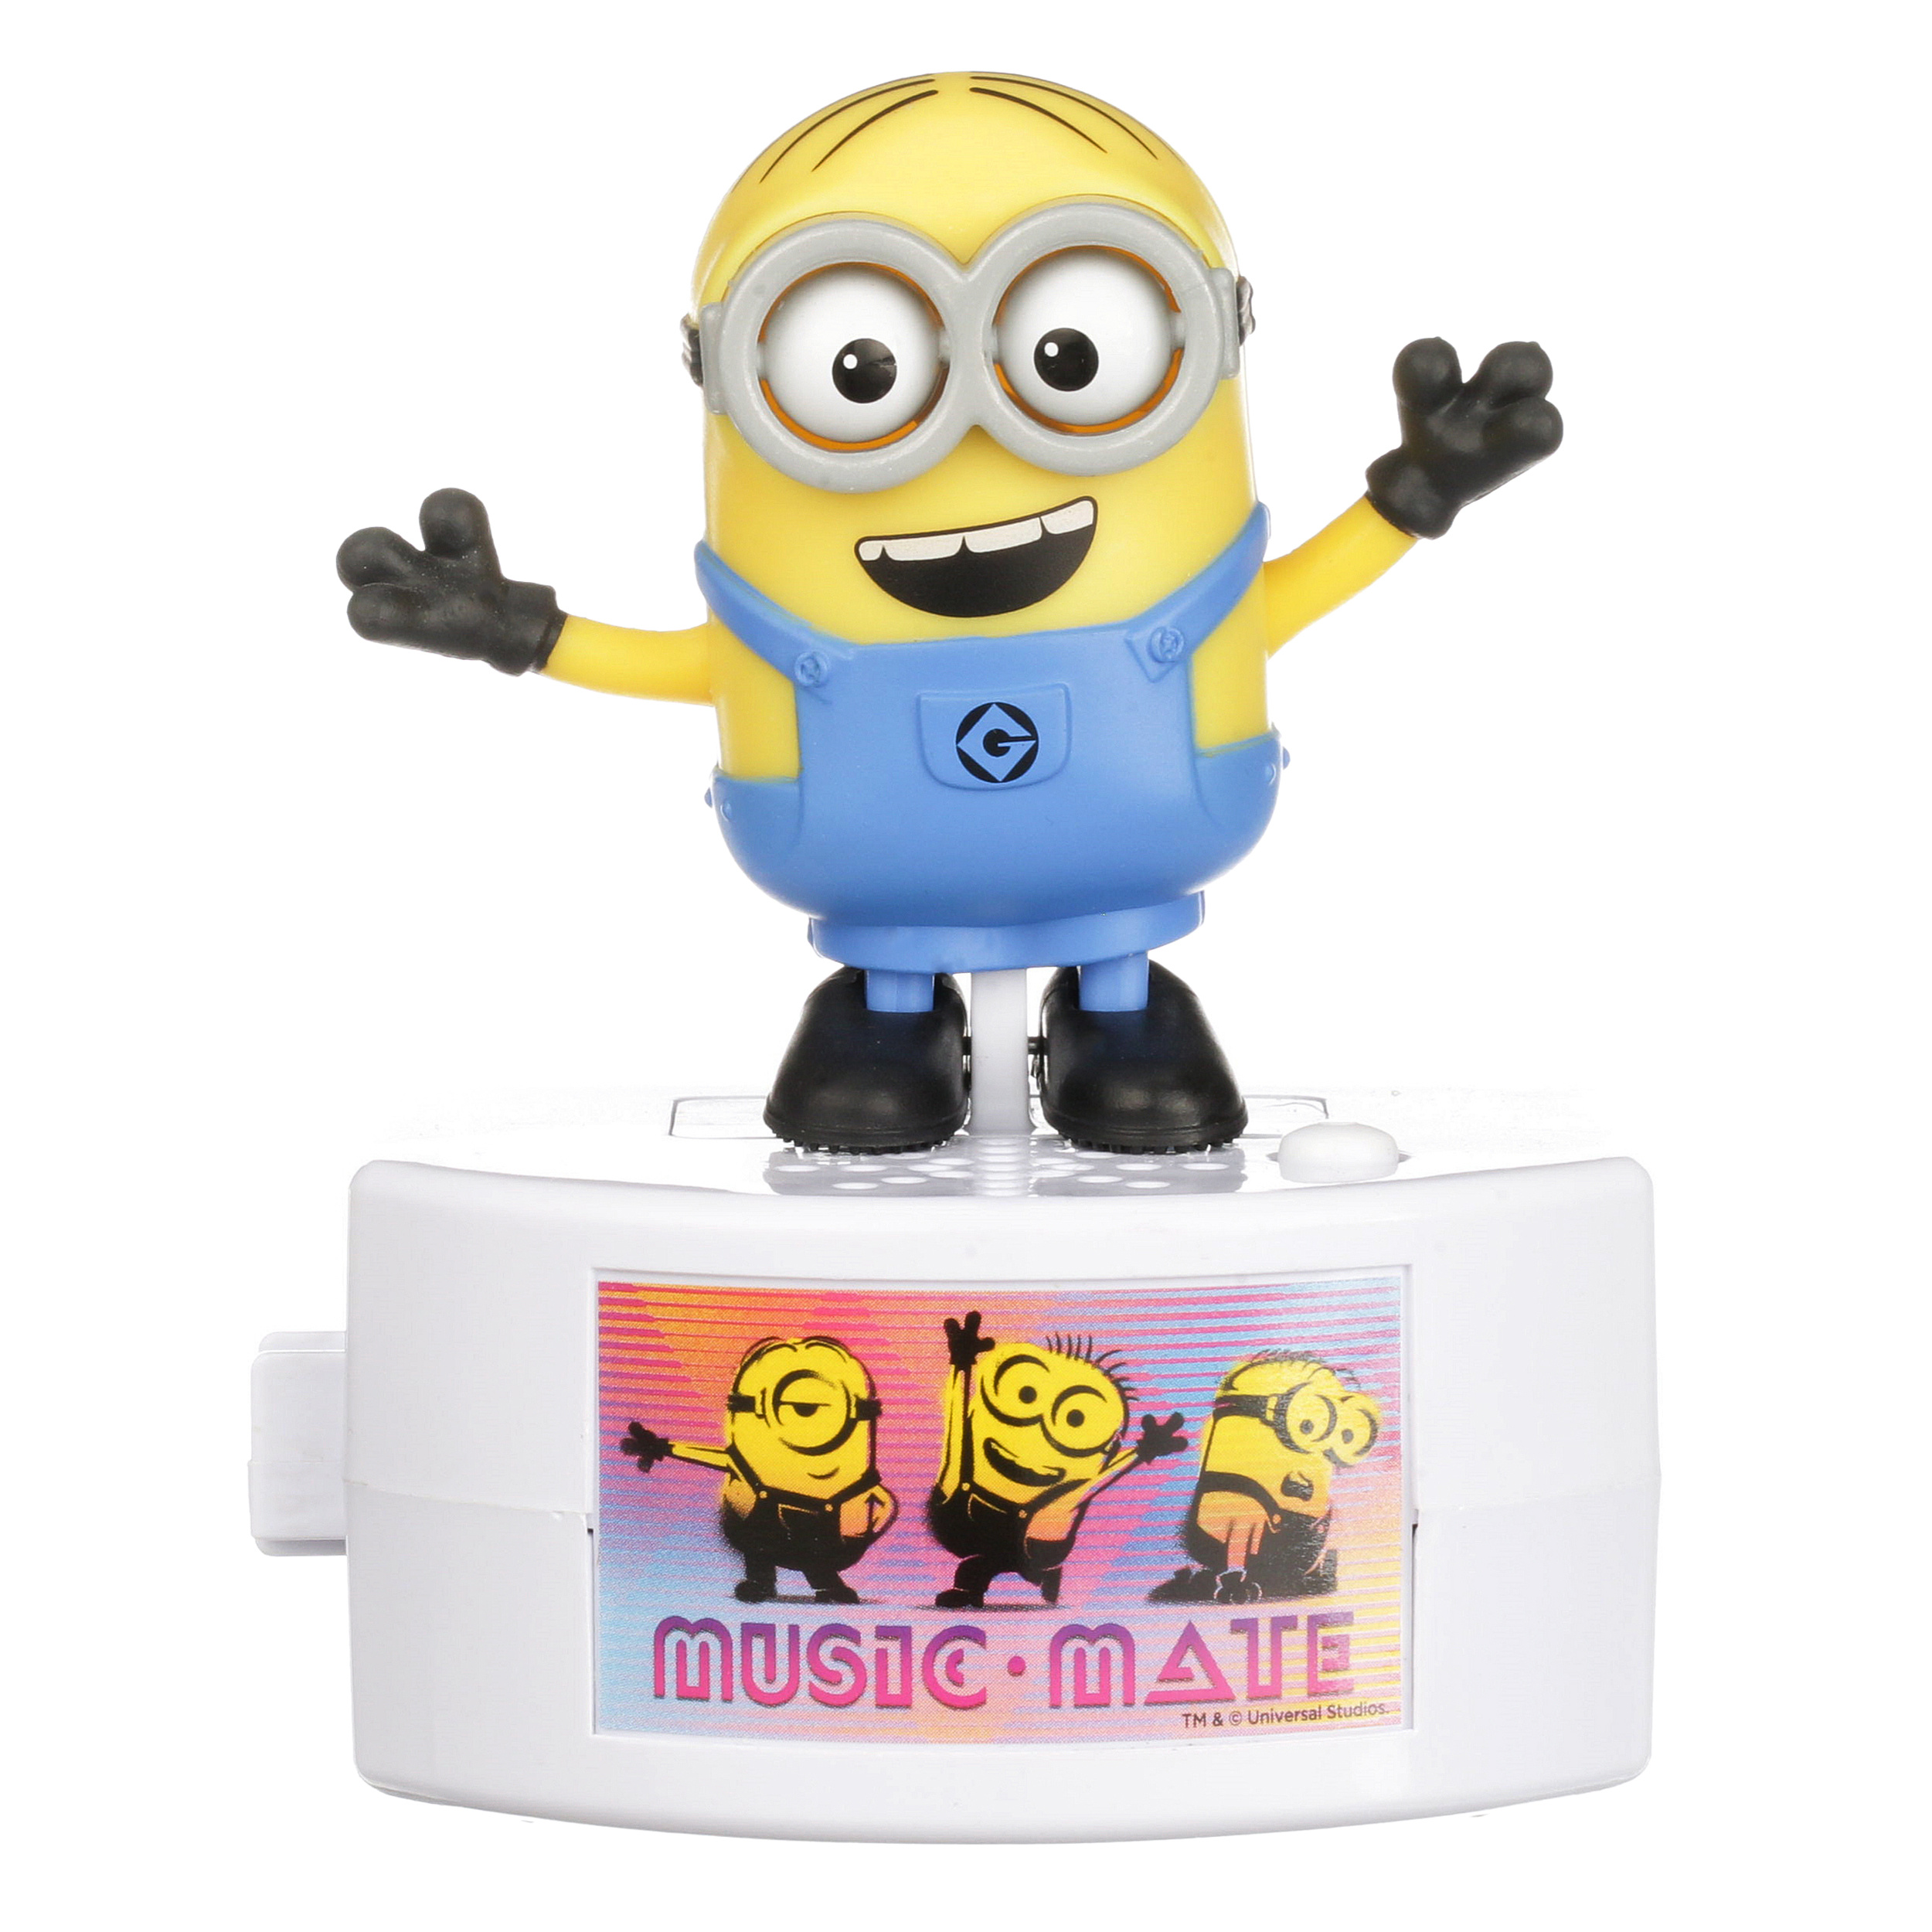 Despicable Me 3 Minion Music-Mate Dave with Voice and Music - image 4 of 5